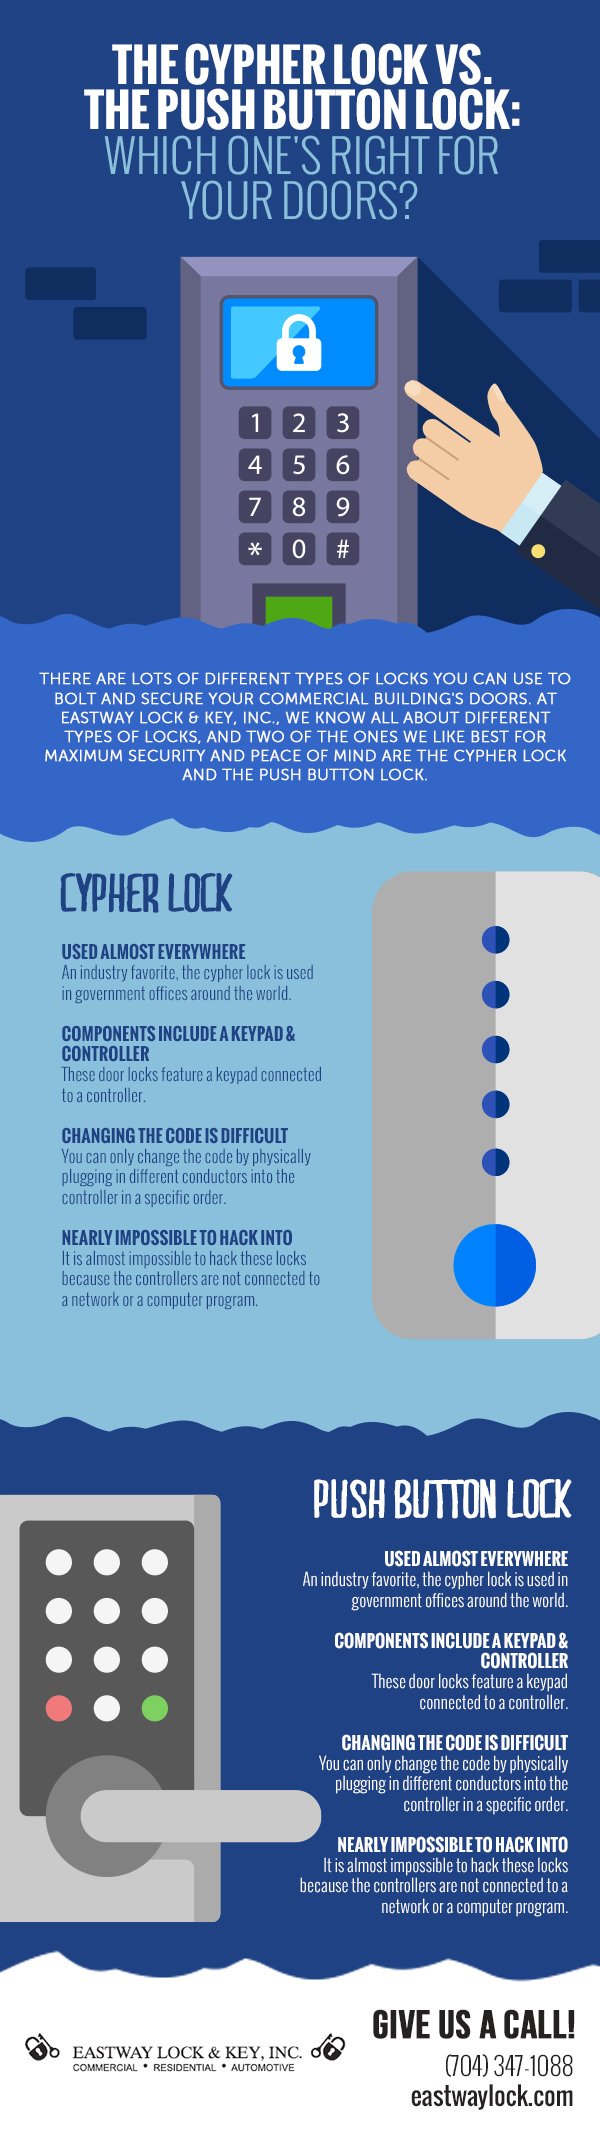 The Cypher Lock vs. the Push Button Lock: Which One's Right for Your Doors? [infographic]